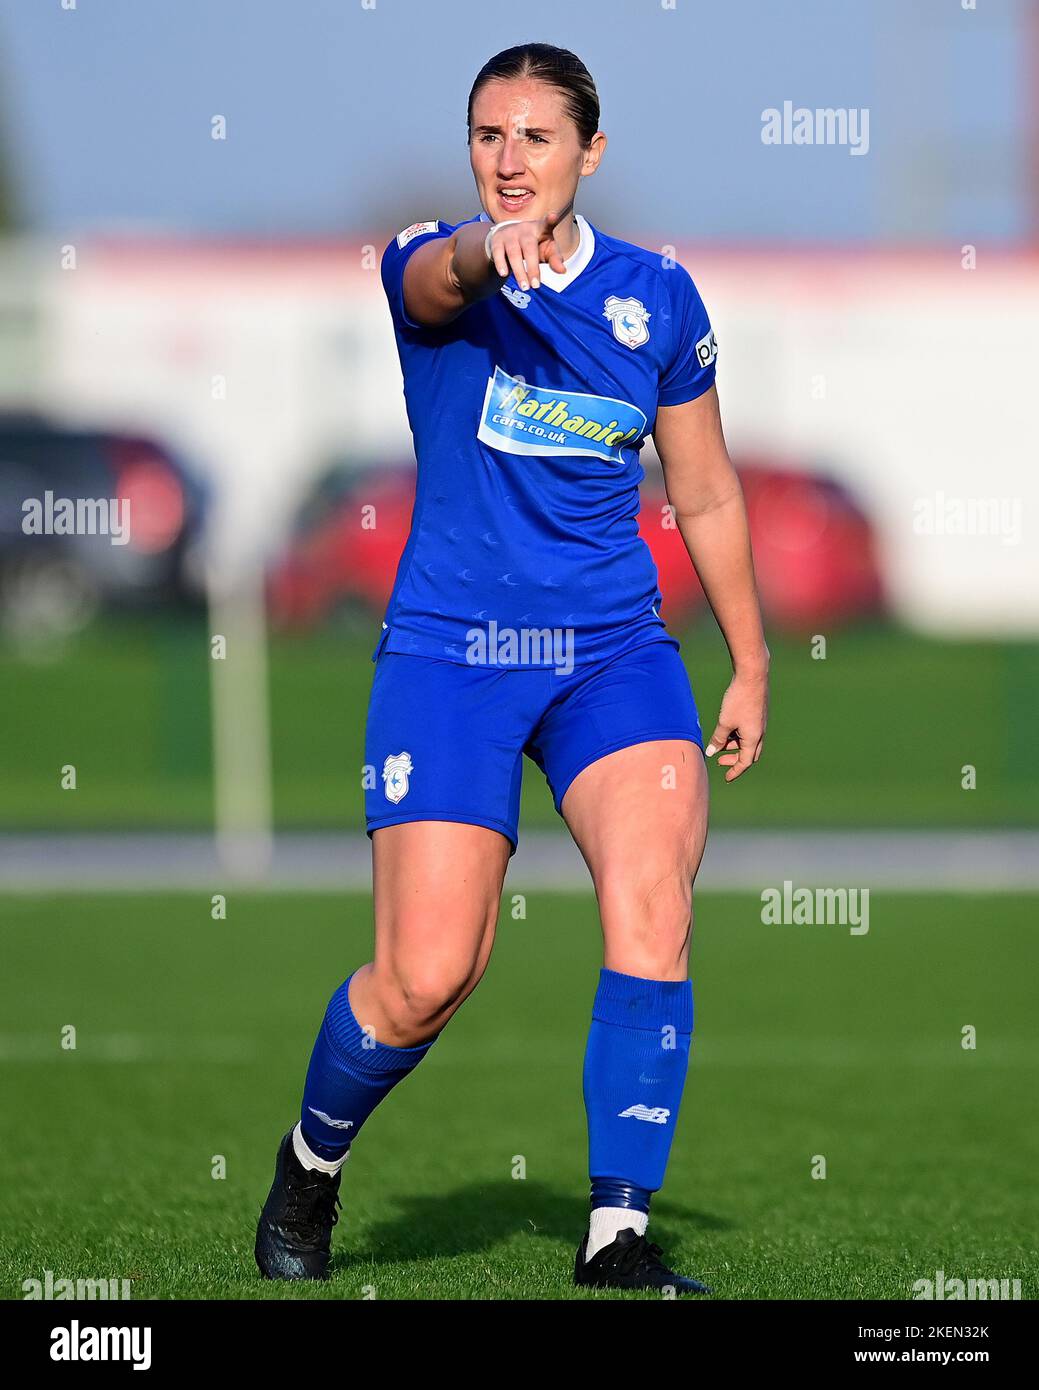 Hannah Power of Cardiff City Women's - obligatoire By-line: Ashley Crowden - 13/11/2022 - FOOTBALL - Cardiff International Sports Stadium - Cardiff, pays de Galles - Cardiff City Women FC vs Cardiff met WFC - Genero Adran Premier phase 1 22/23 Banque D'Images